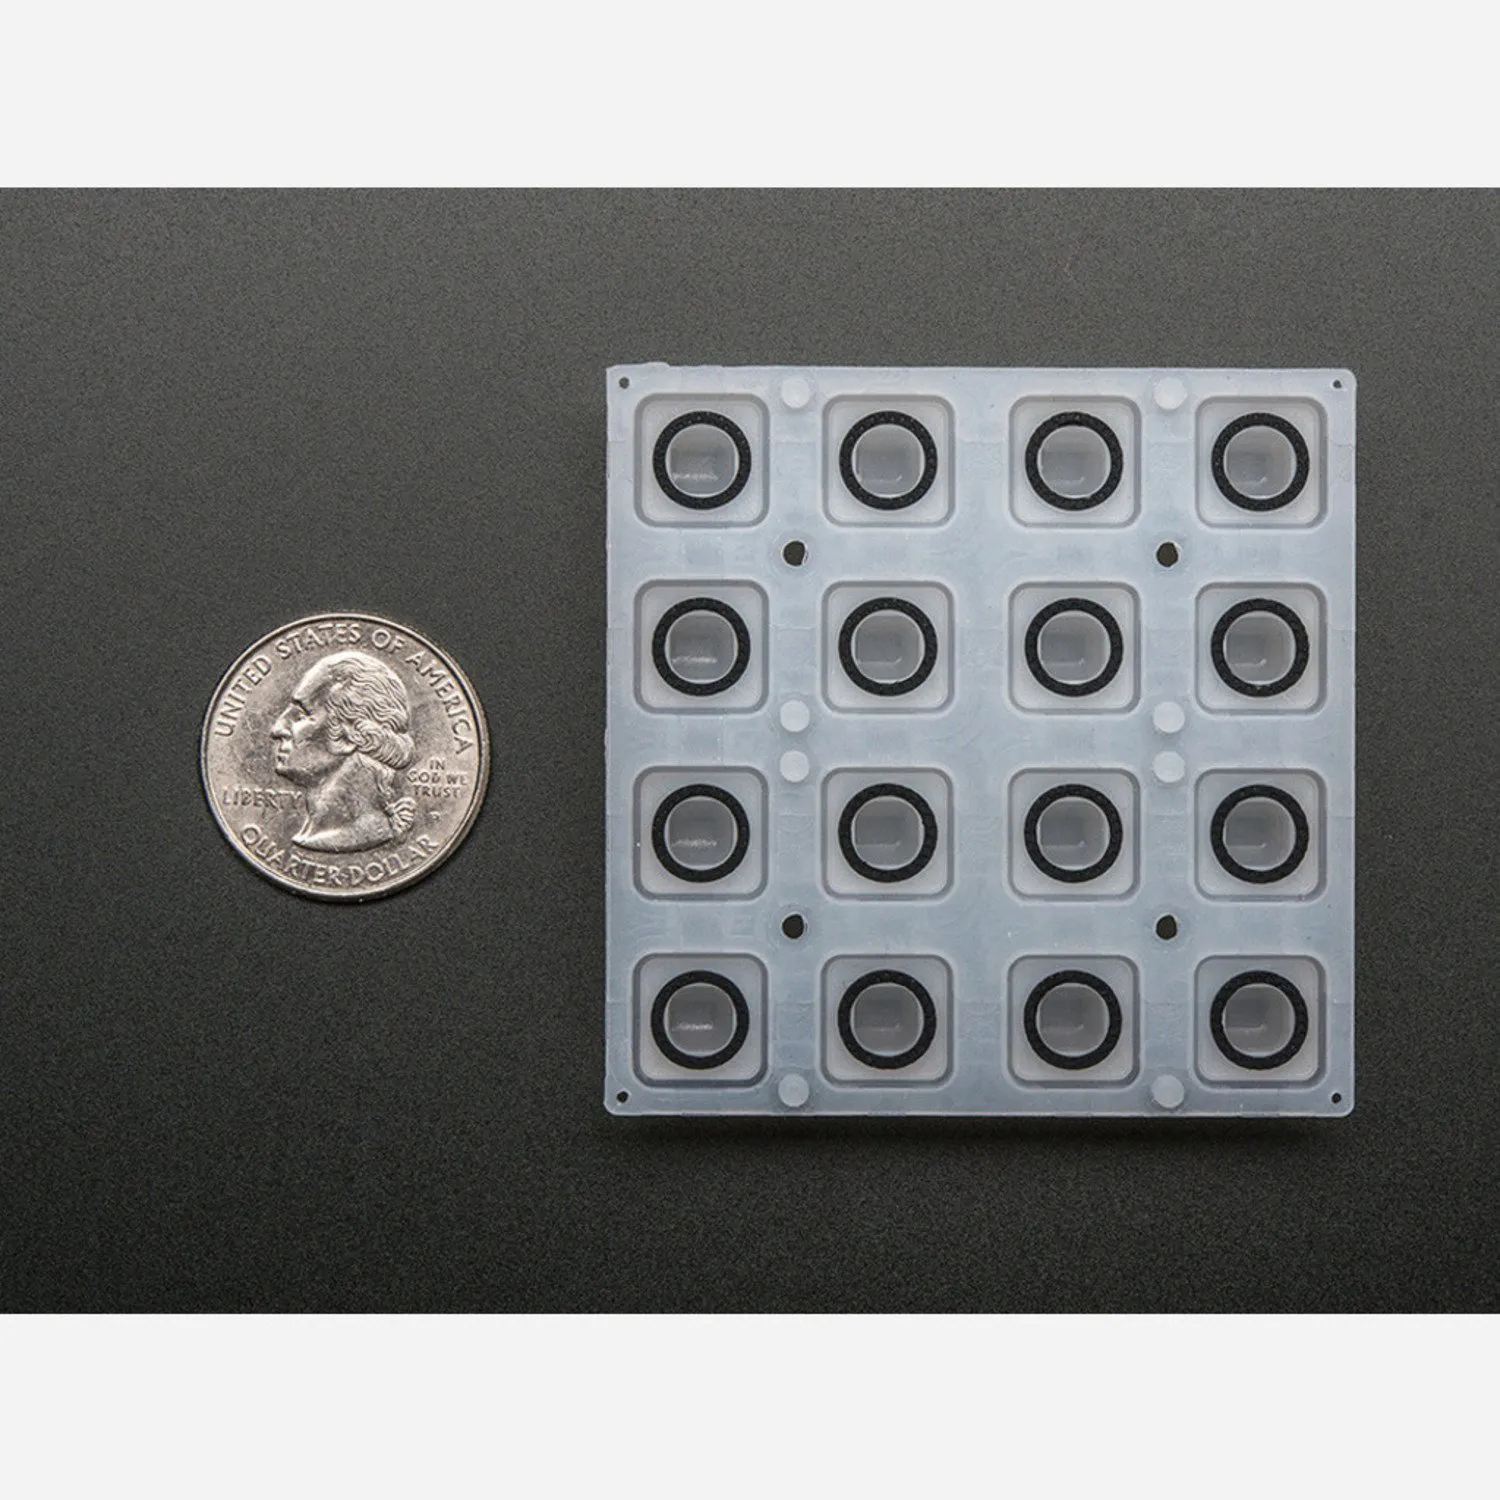 Photo of Silicone Elastomer 4x4 Button Keypad - for 3mm LEDs